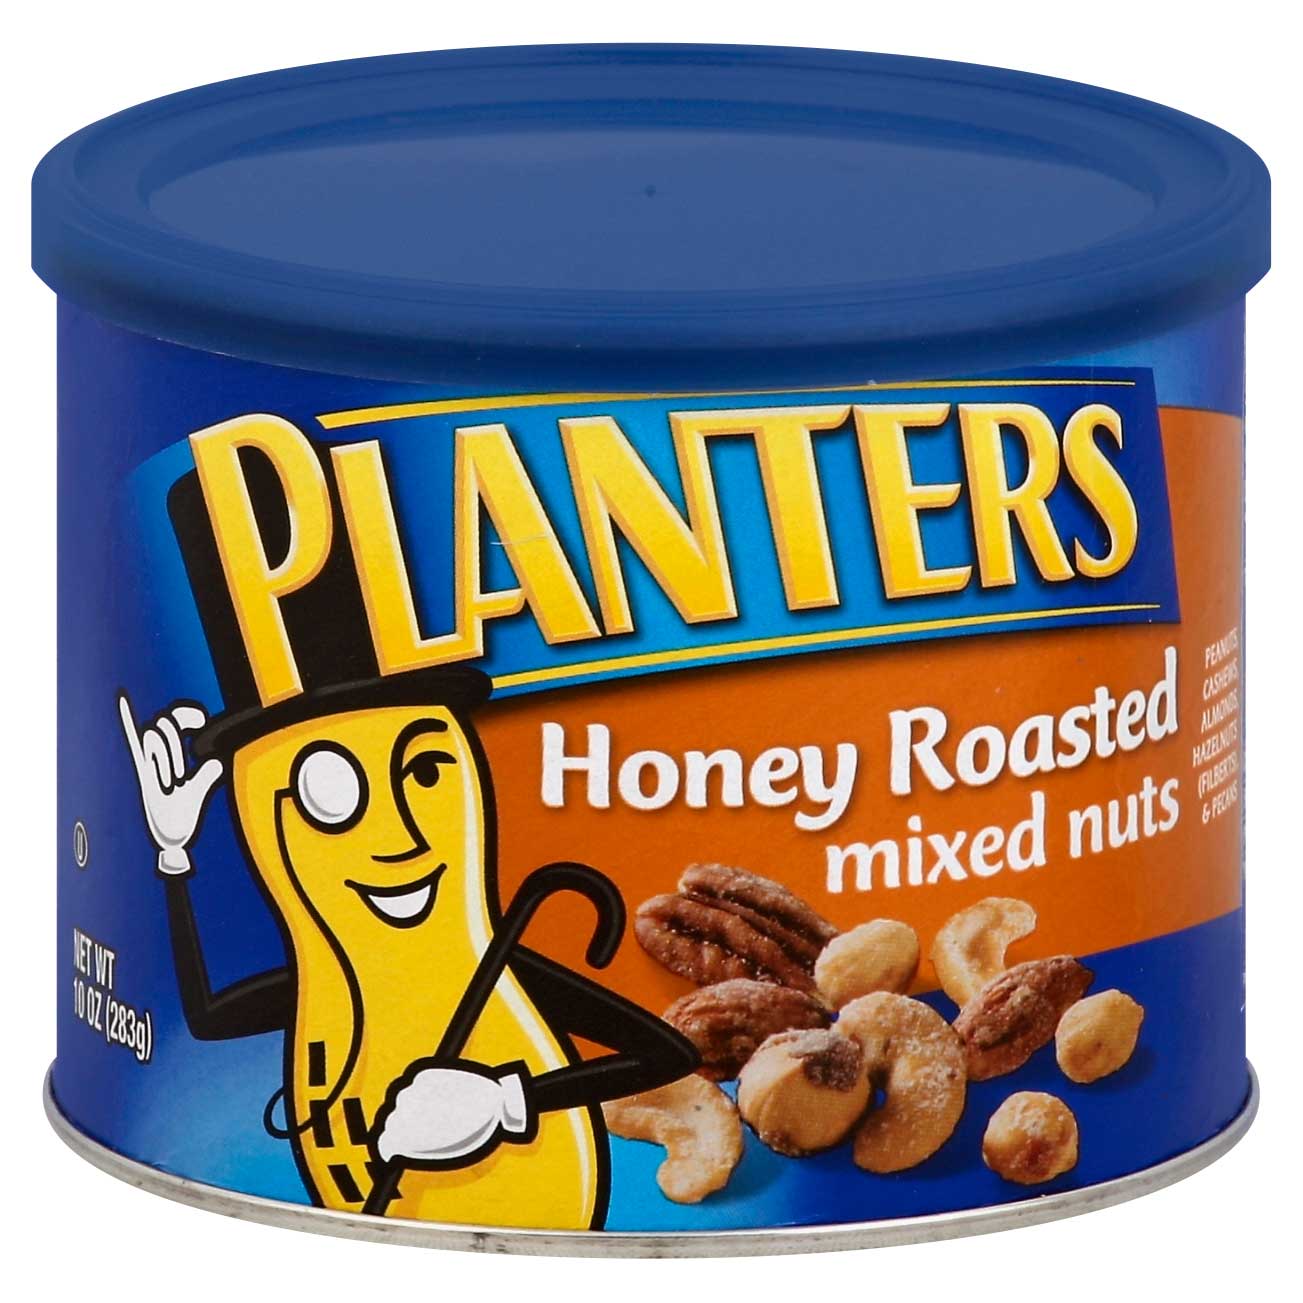 Planters Honey Roasted Mixed Nuts Case